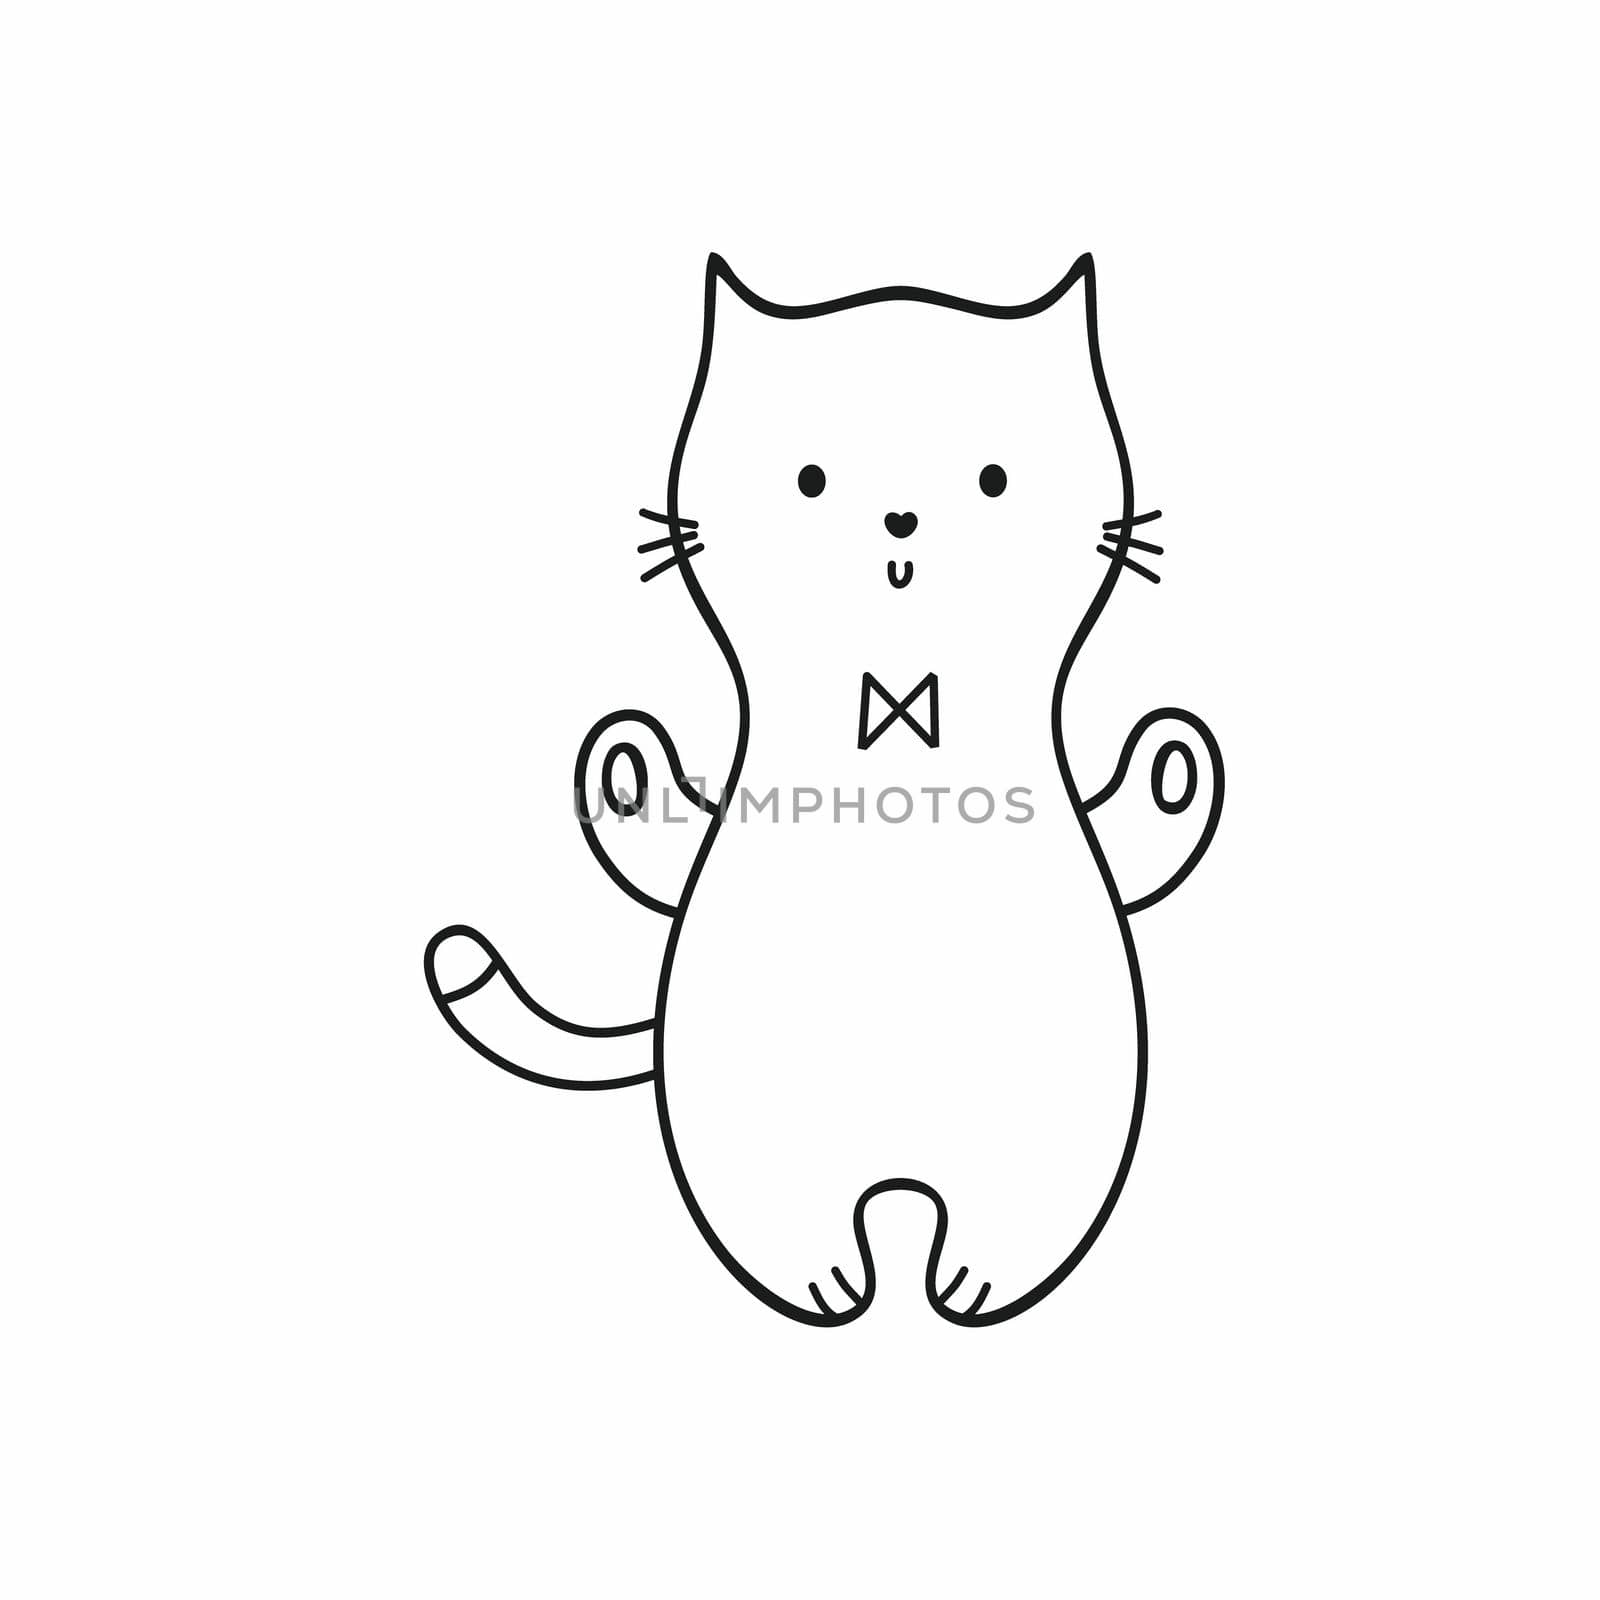 Contoured kitten with a bow tie on the chest. Vector simple Doodle illustration of a cat in a minimalistic style. Element for decorating a holiday, postcard, or Notepad.